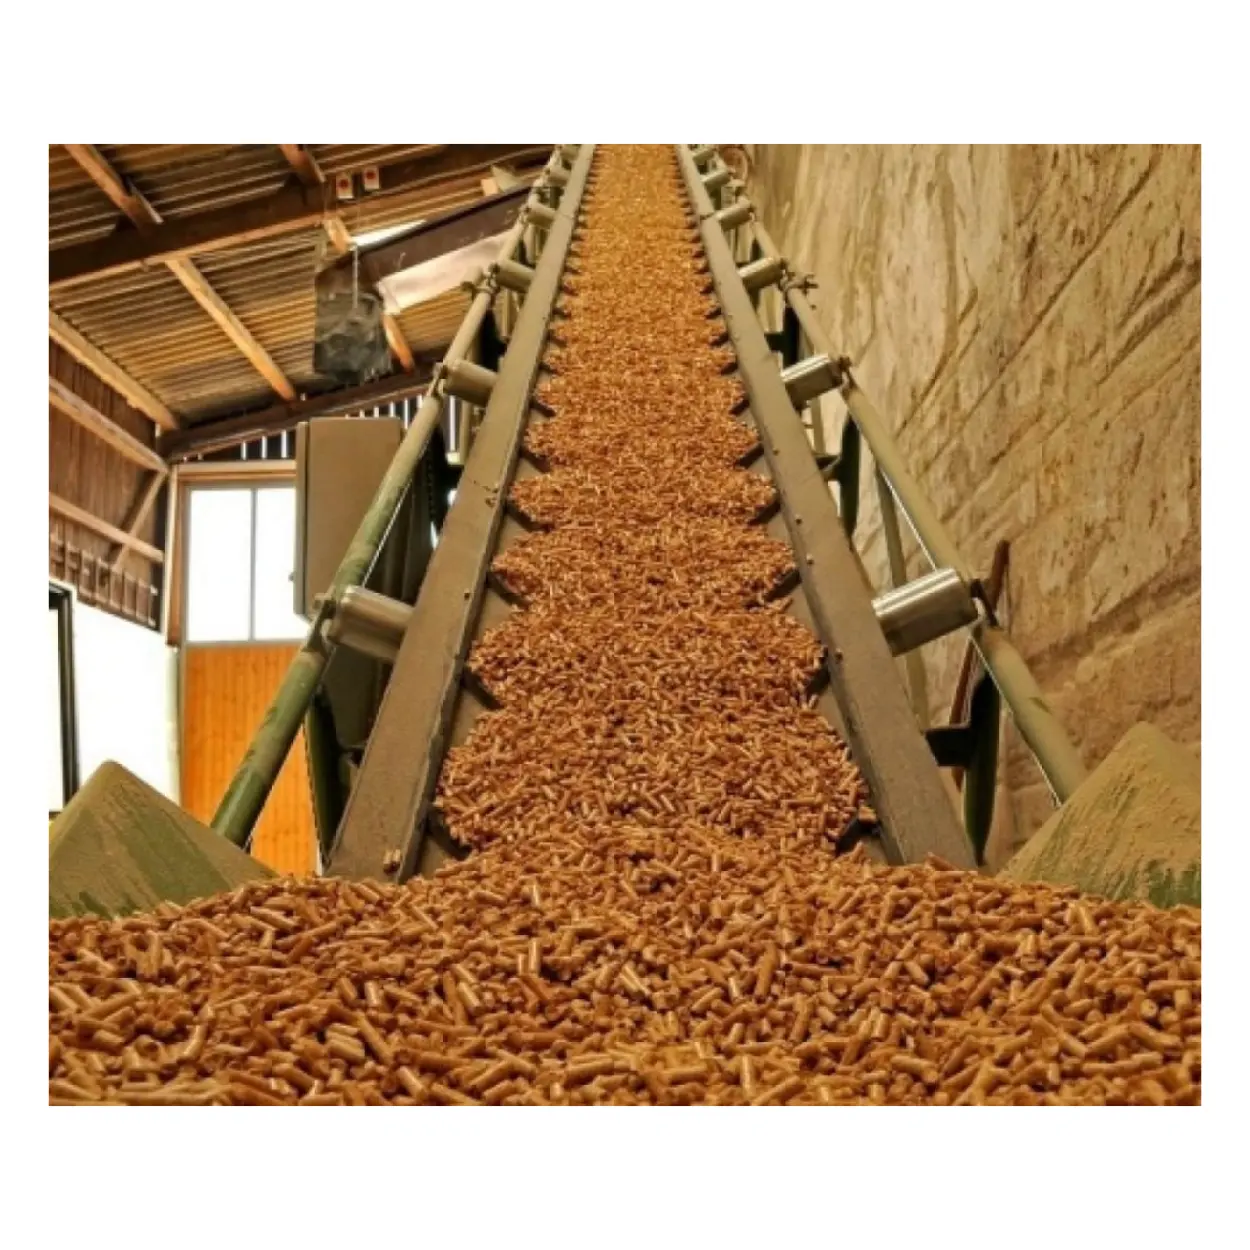 Wholesaler in China Wooden pellets domestic No coke Heating in winter Biomass pellet fuel Quality